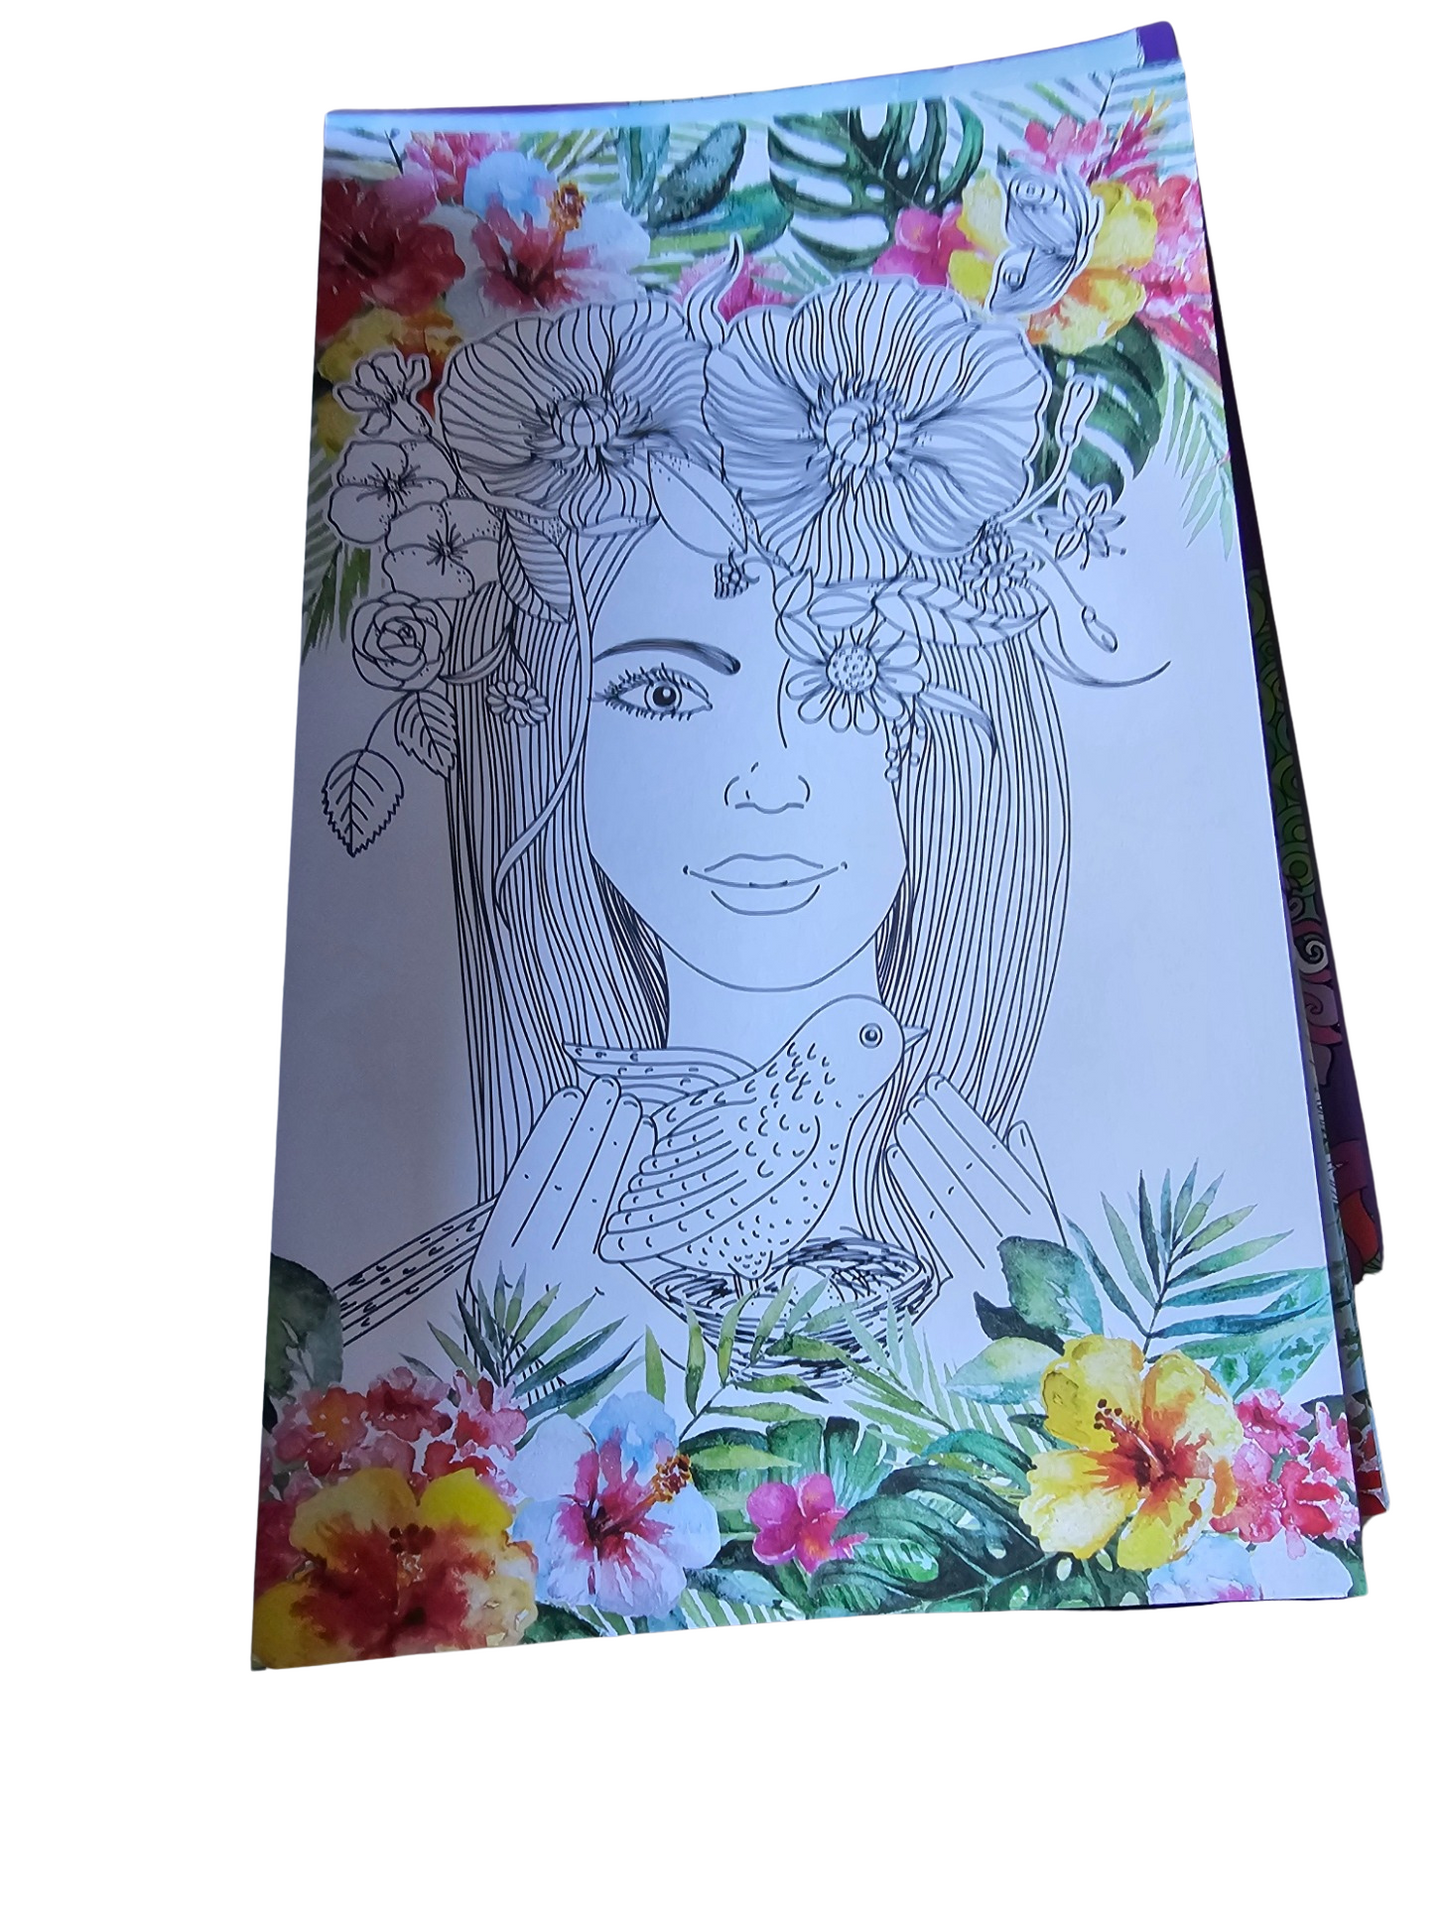 Illustrated Colouring Books by Decotime